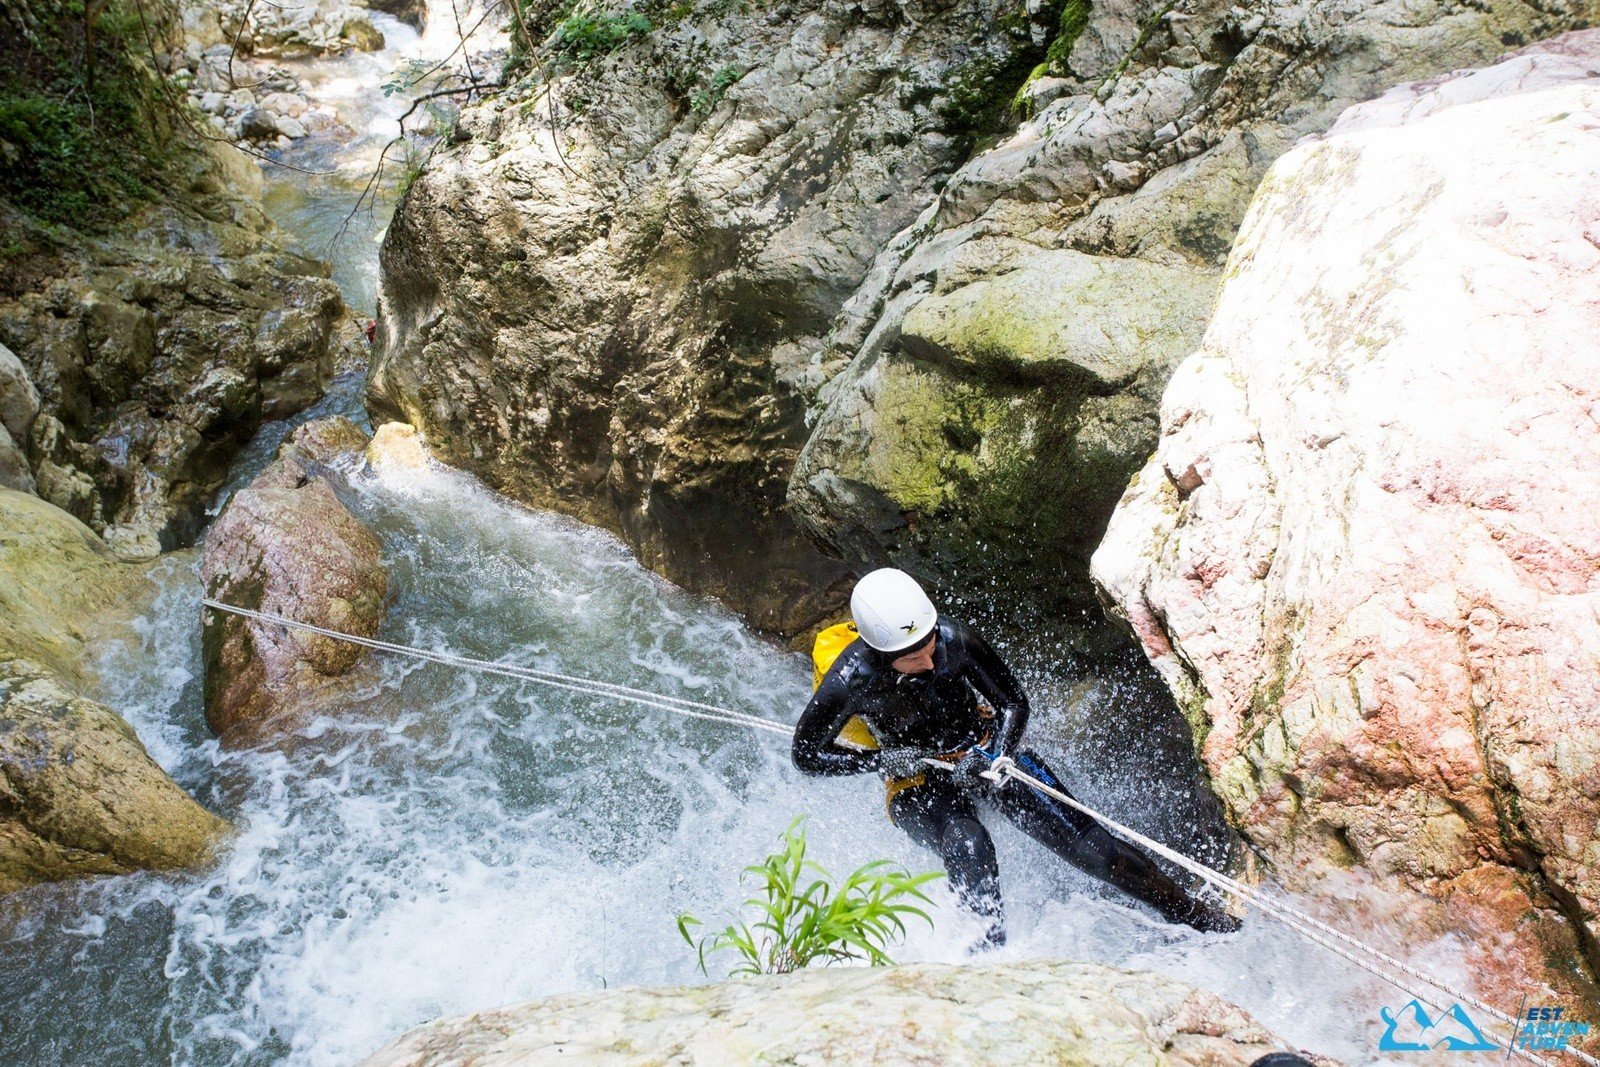 Canyoning in Serbia's Valievo Mountains